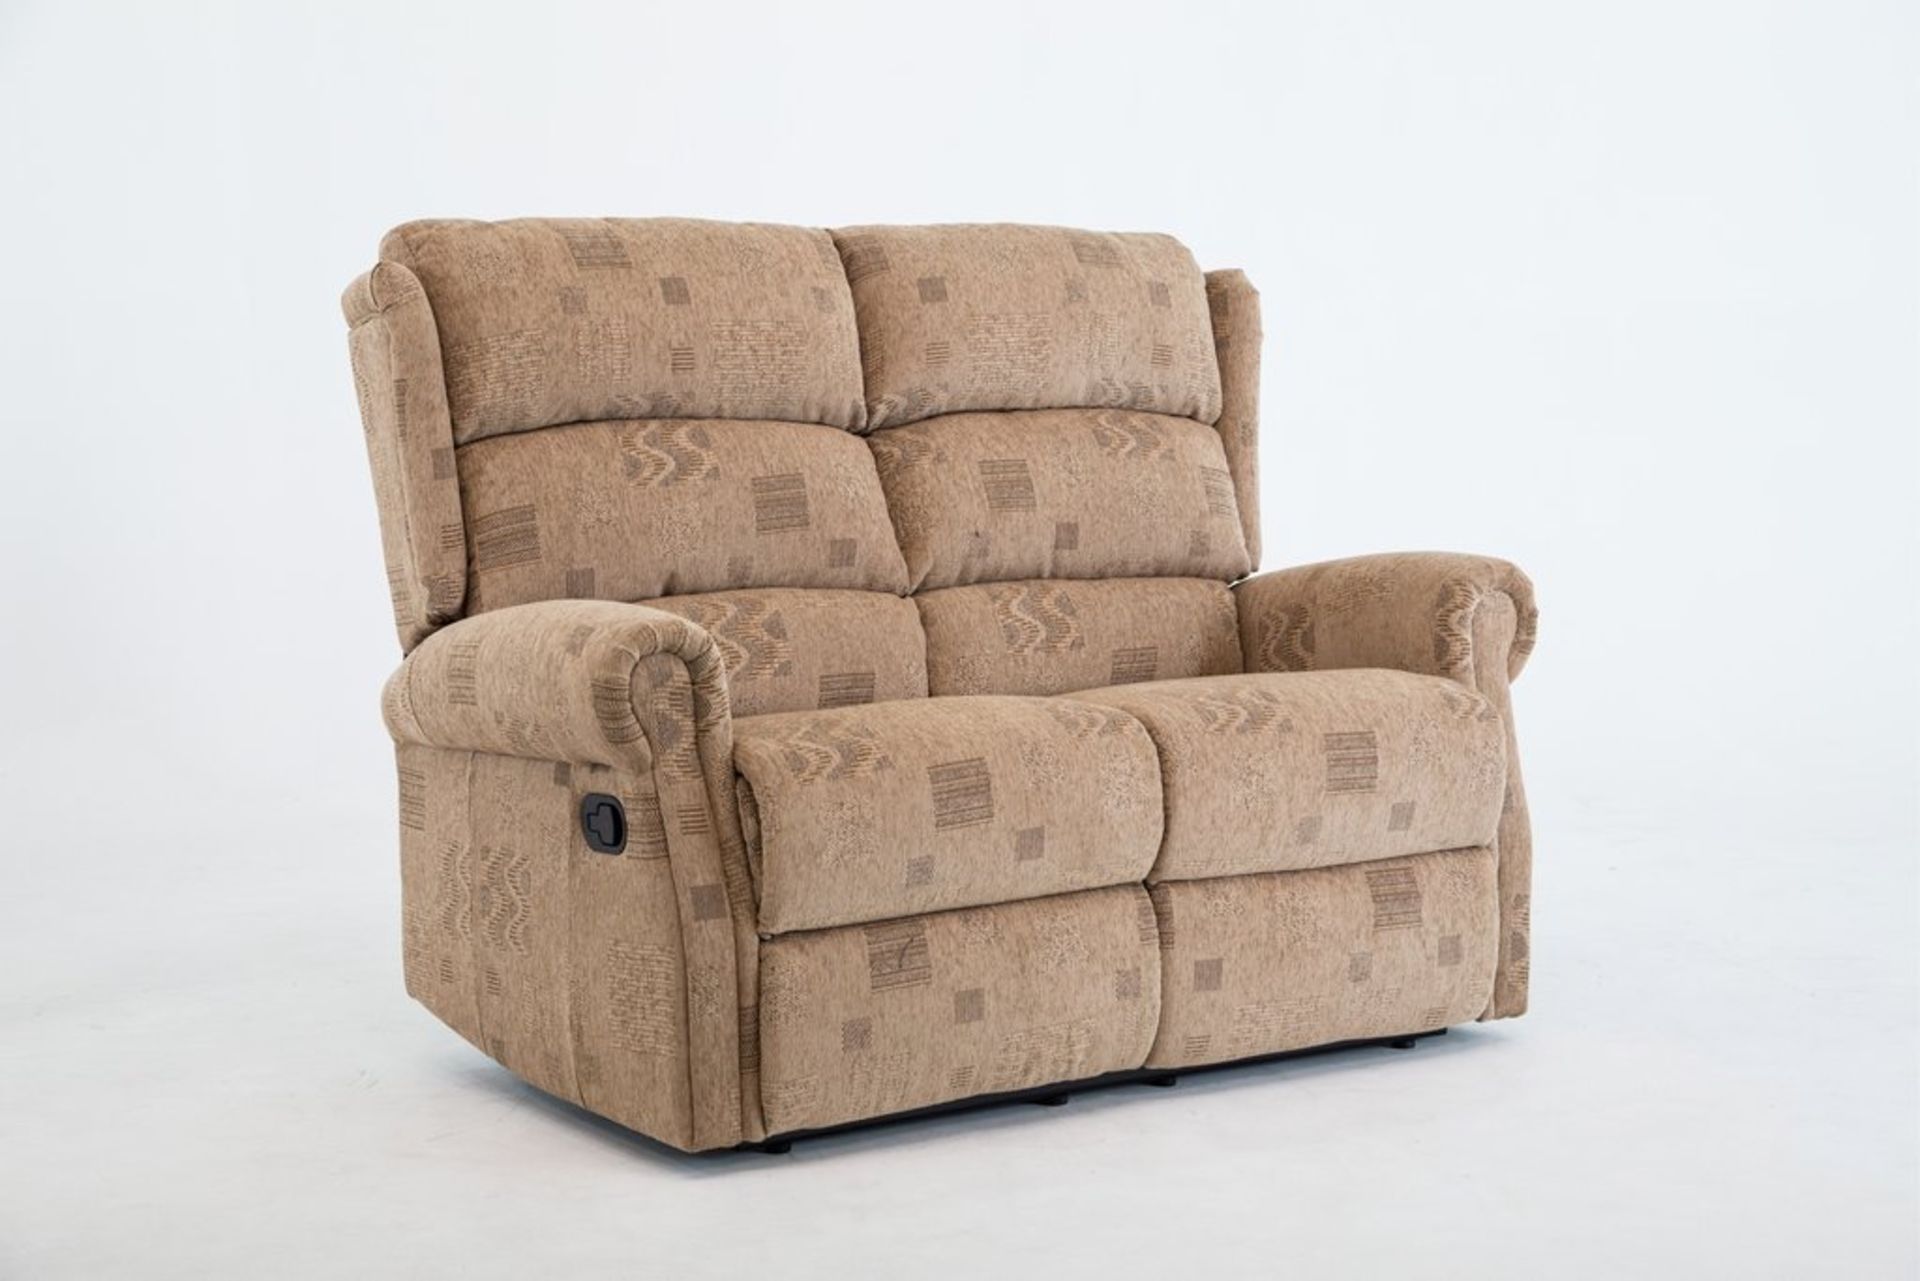 Brand new boxed cambridge 2 seater reclining sofas in soho patchwork fabric